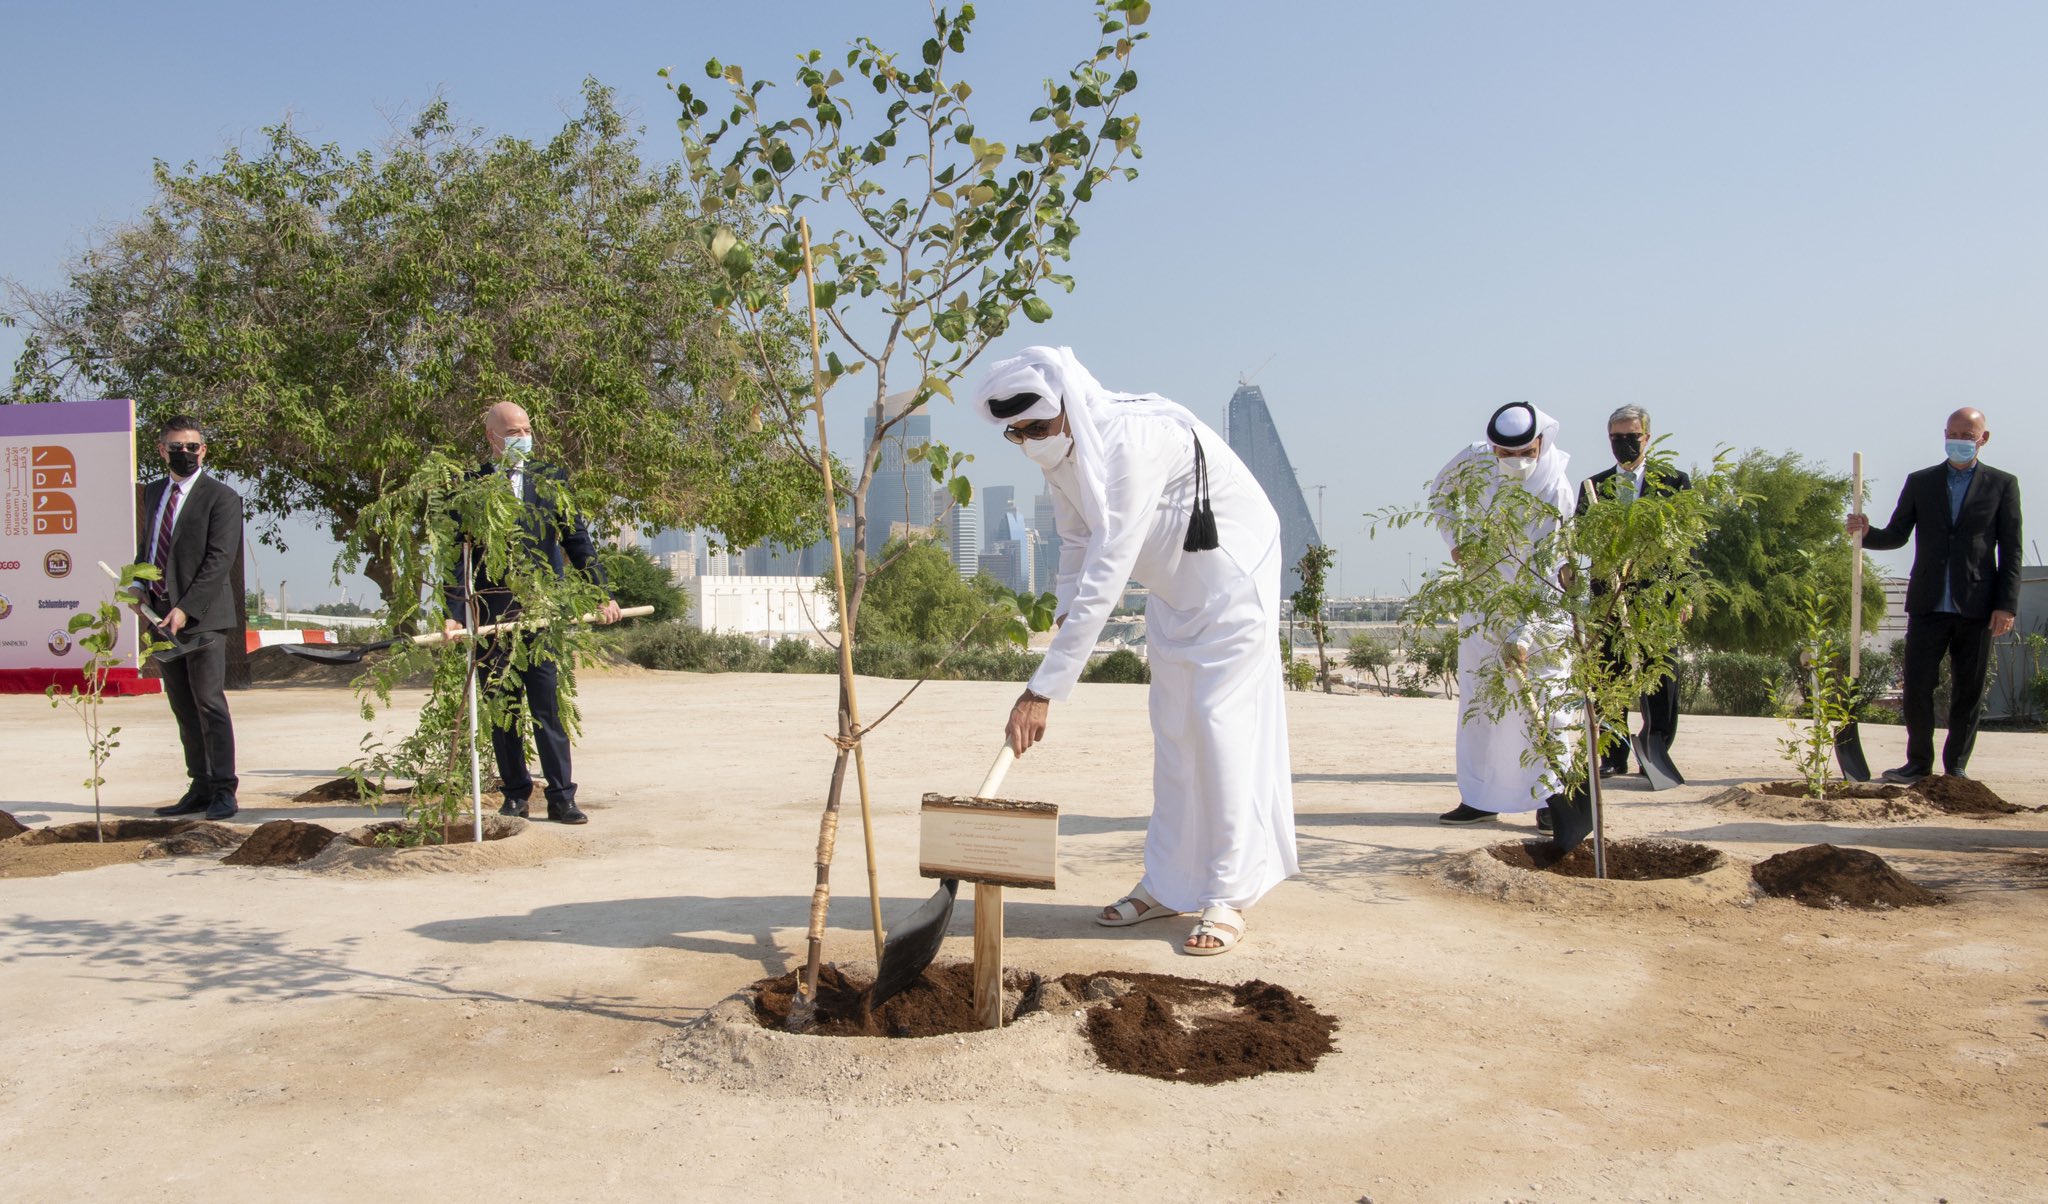 Qatar Thanks El Salvador For Joining Initiative to Plant One Million Trees